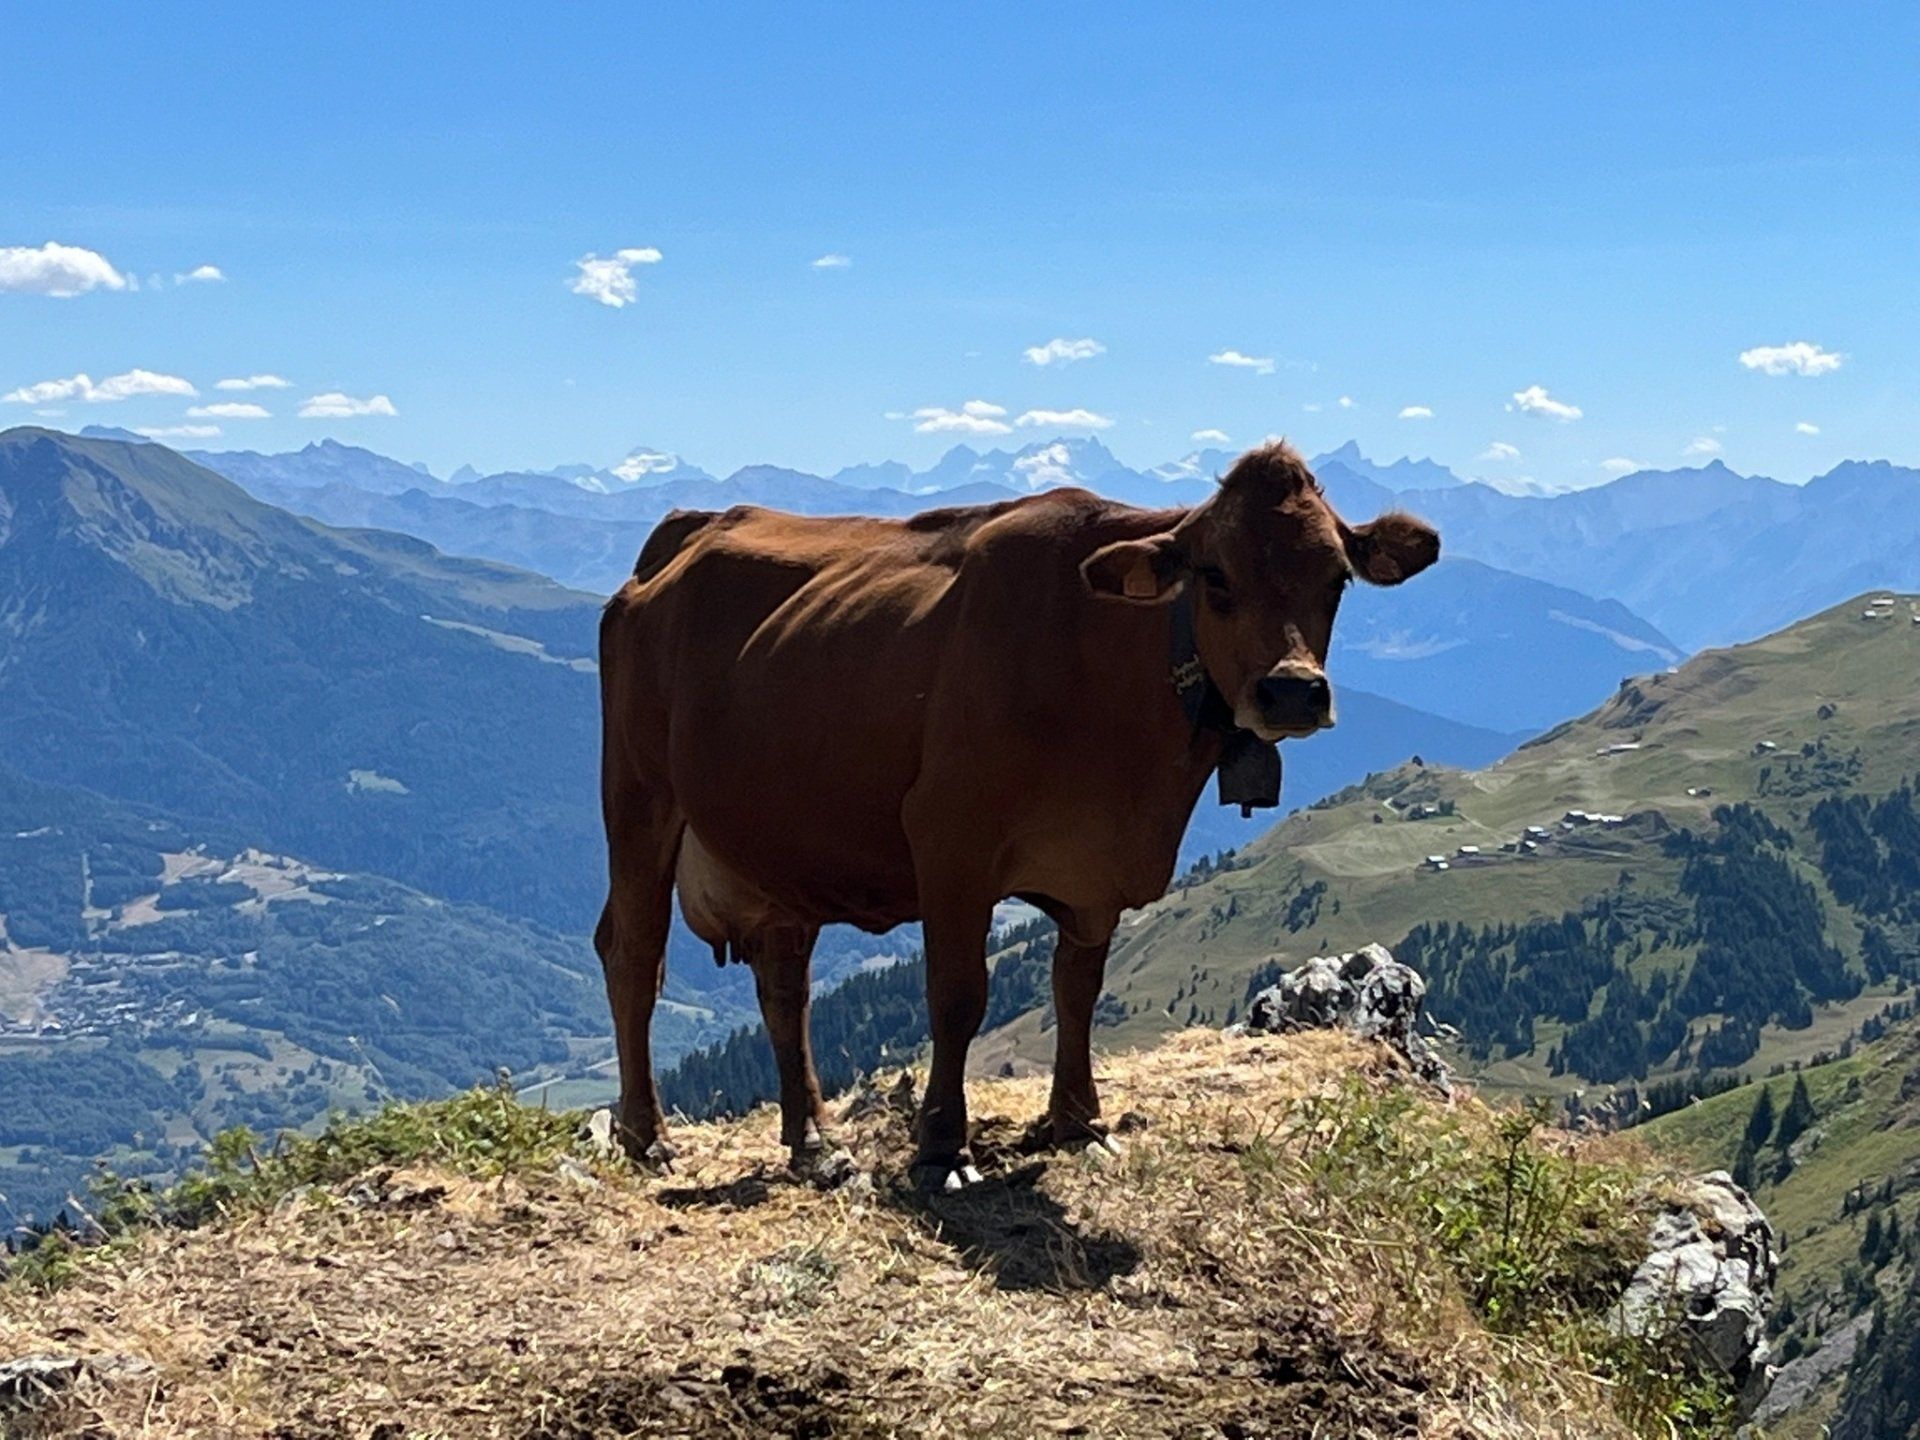 Cow in the Tarentaise Valley